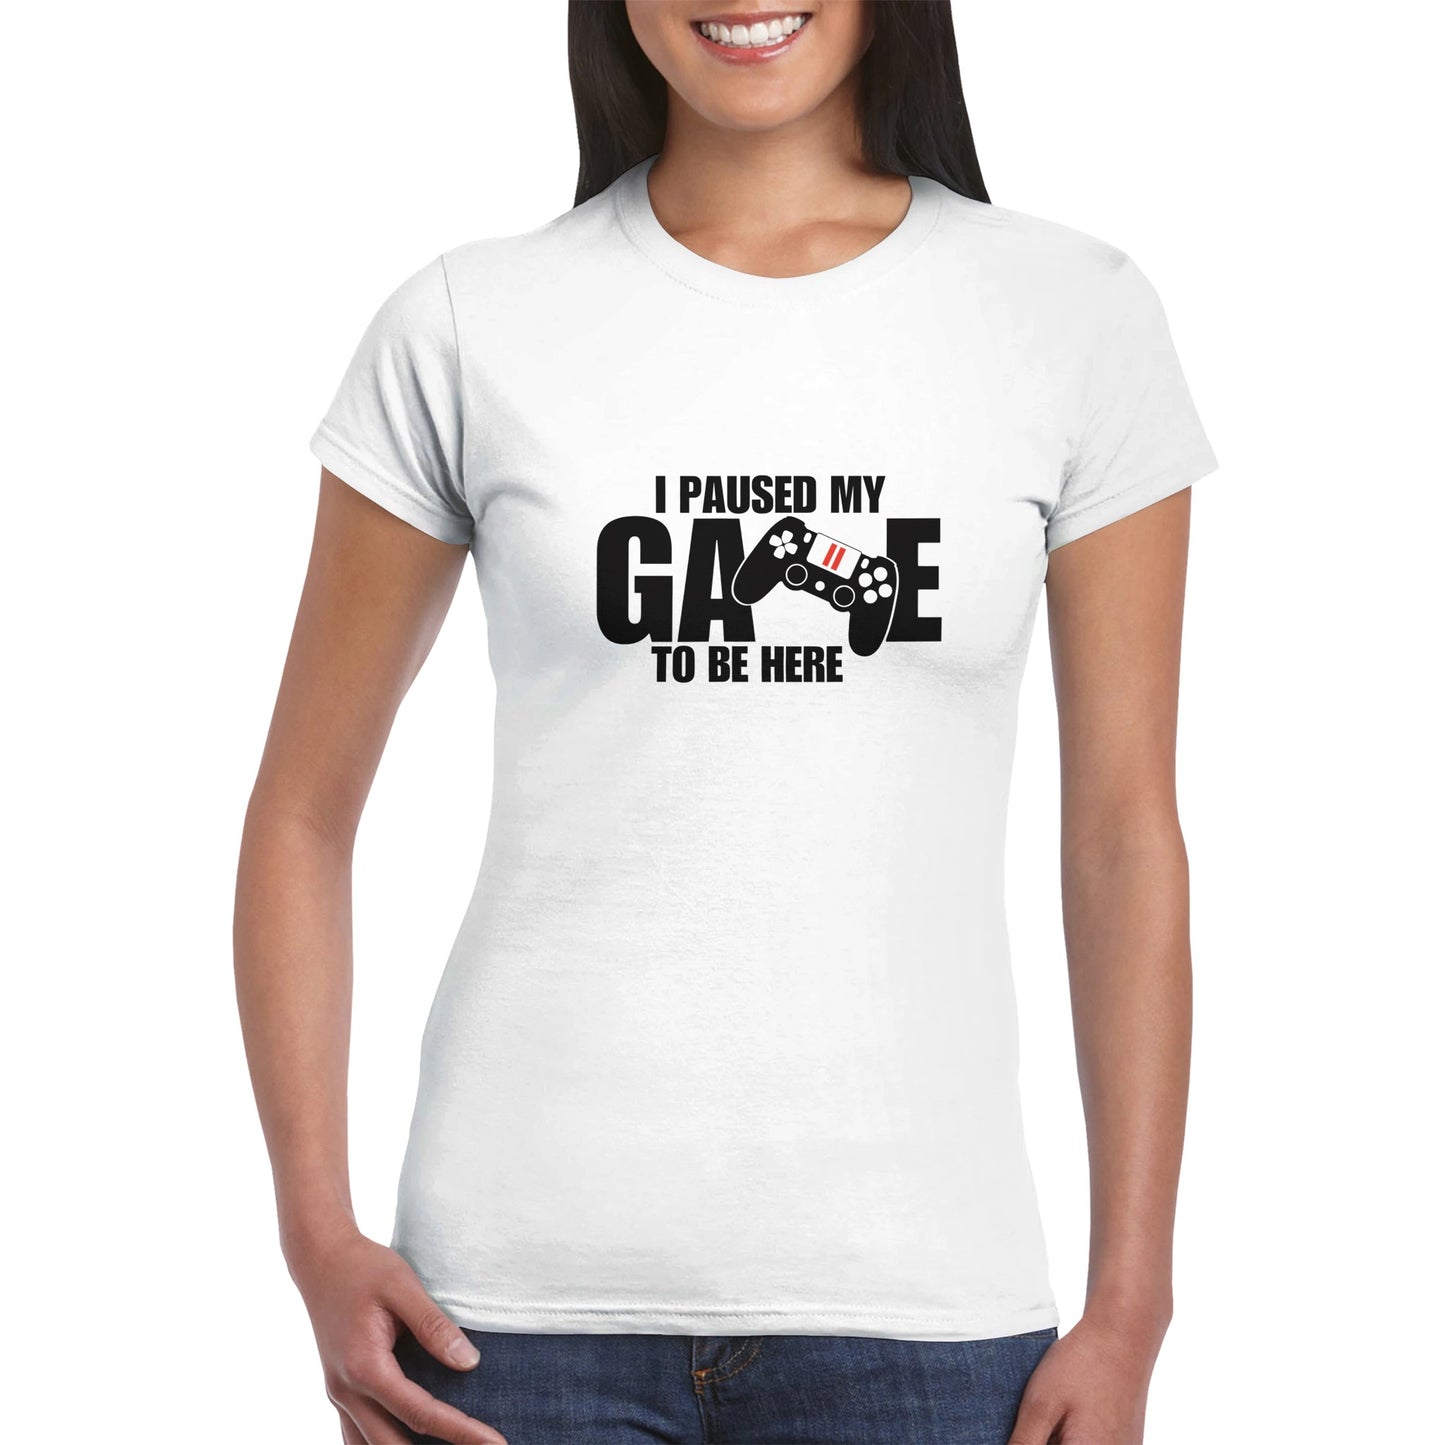 Women Crewneck T-shirt I paused my Game to Be Here, Funny Shirt, Gamer Gift, Funny Gaming Shirt, Gaming T-Shirt, Funny T-shirt